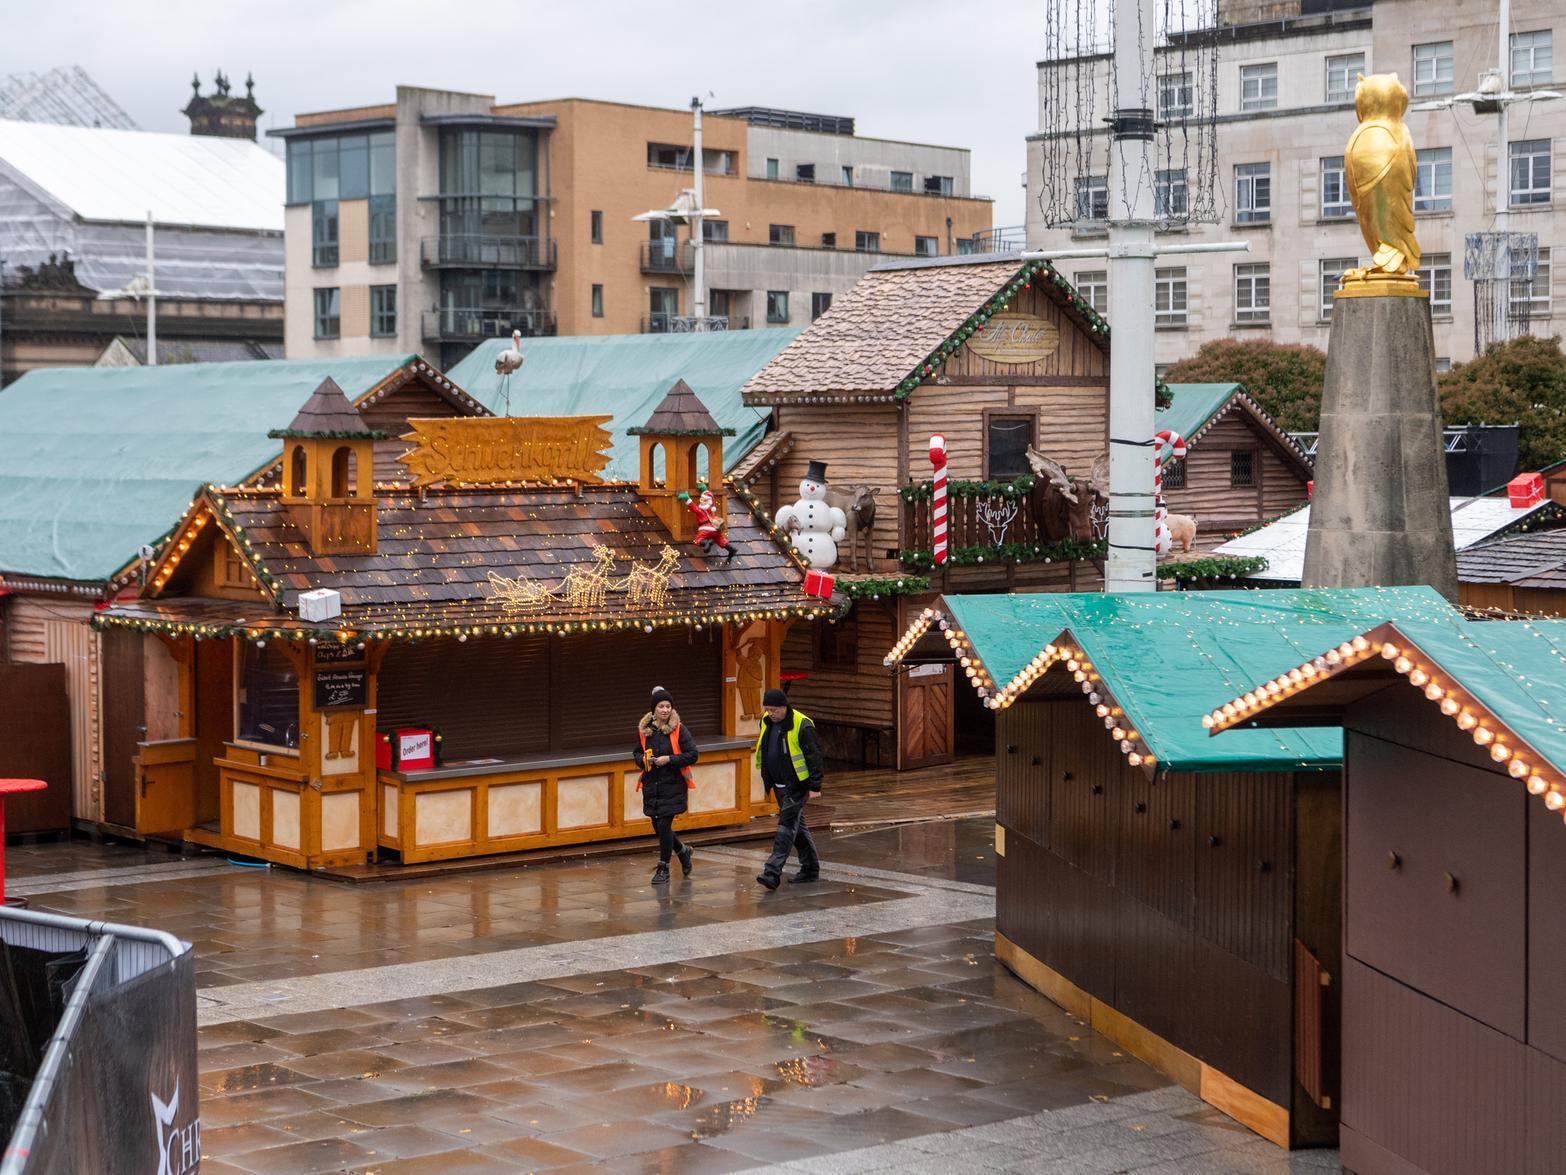 There are plenty of quirky gifts available from Leeds German Market on Millennium Square - but hurry, the market closes tomorrow. Visit the wooden chalets until 9.30pm tonight (Saturday).